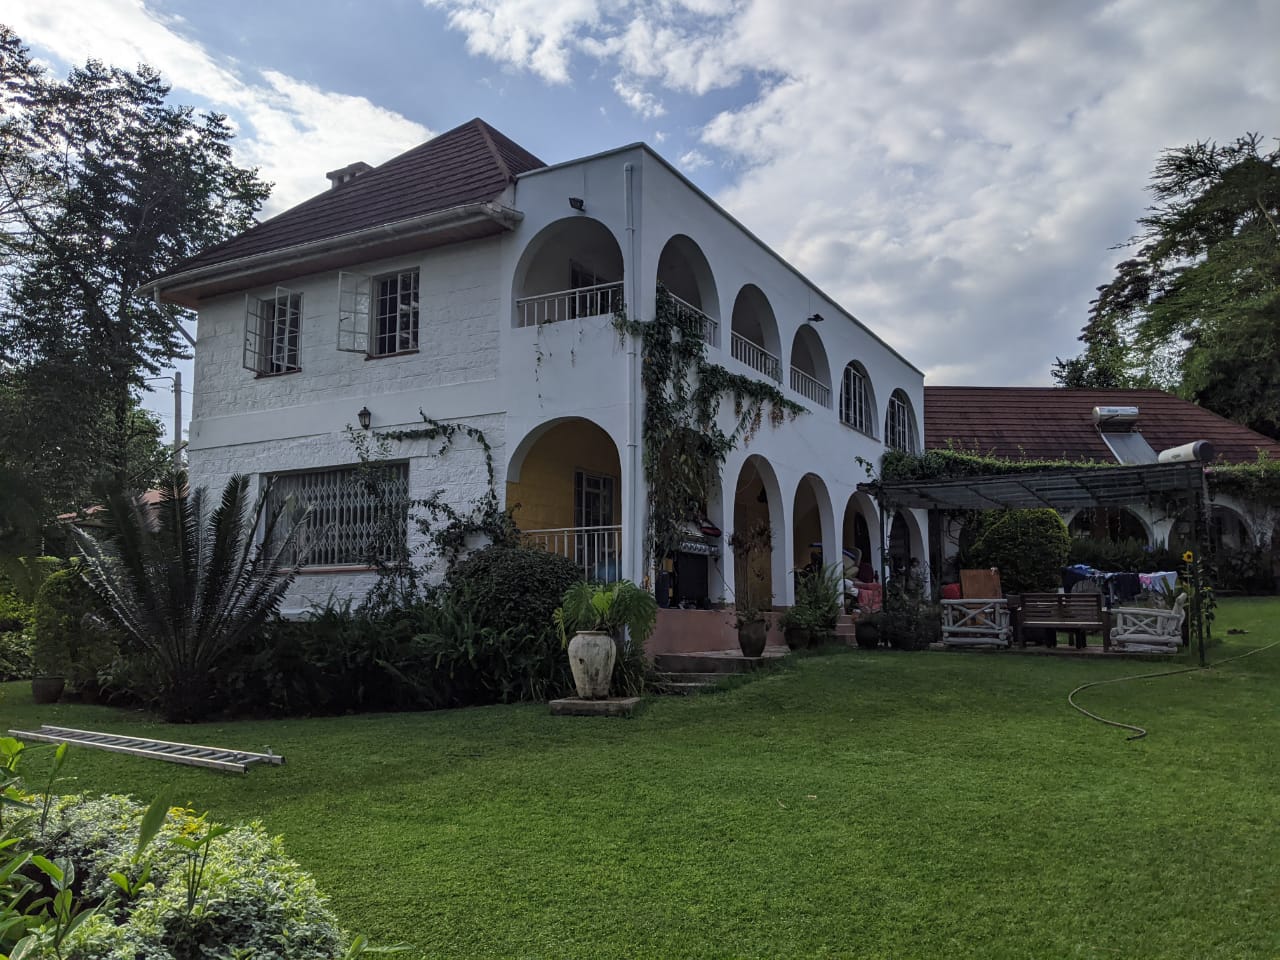 Lovely 5 Bedroom Villa for Rent in Lower Kabete, along Ngecha Road, from ksh450k per Month with exciting Amenities2